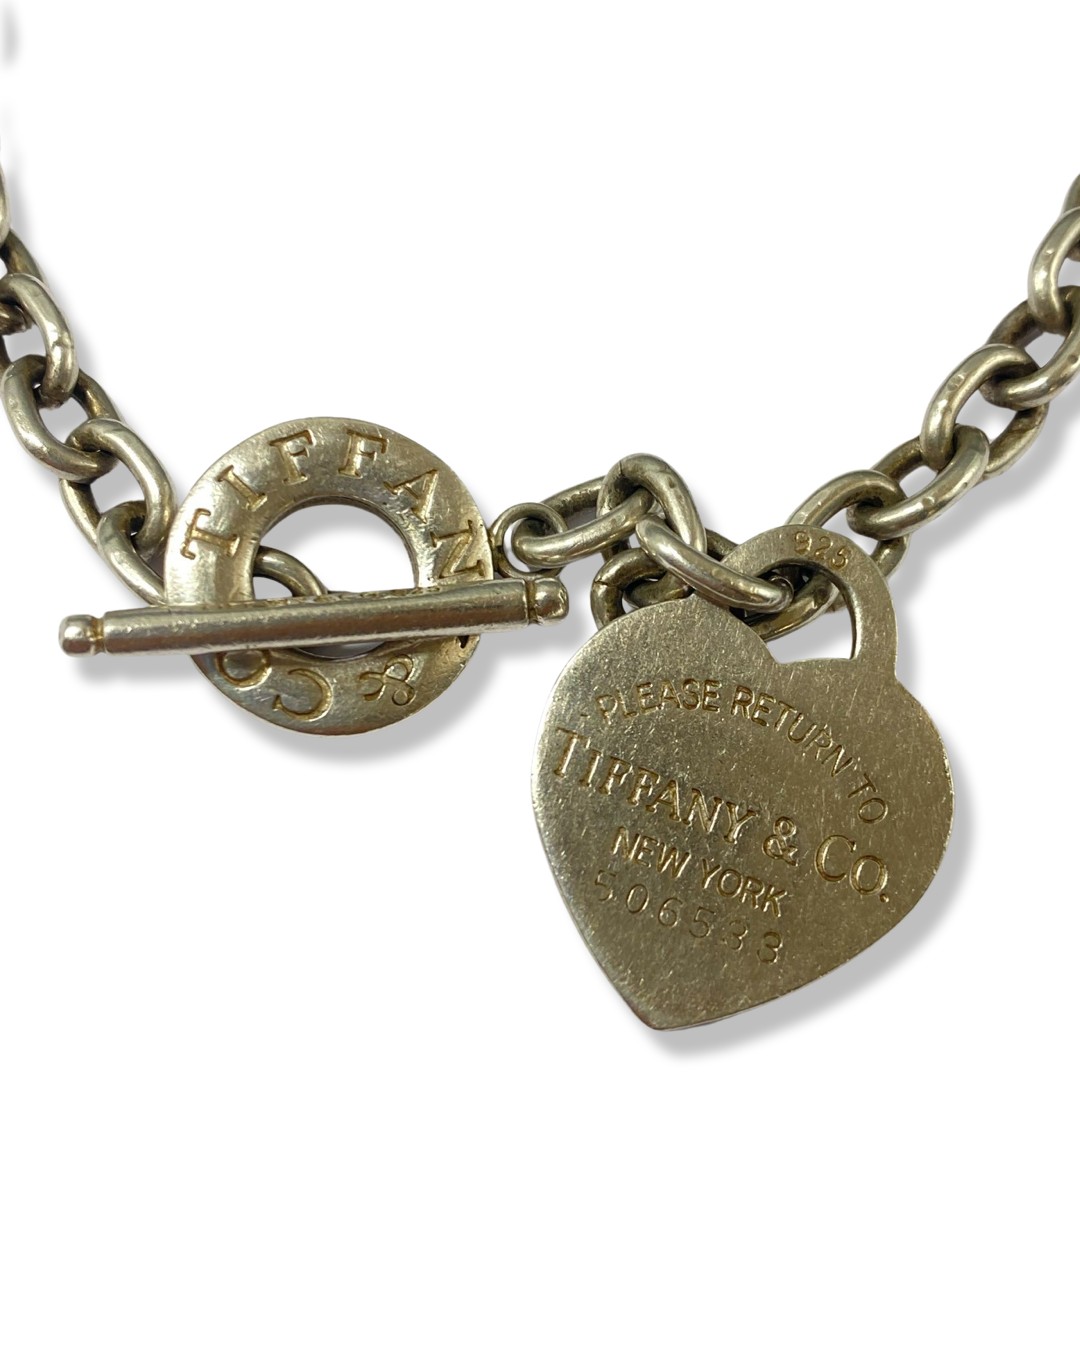 Tiffany & Co. Silver 'Return To Tiffany' Necklace weighing 60.3 grams and measuring 43cm - Image 2 of 2